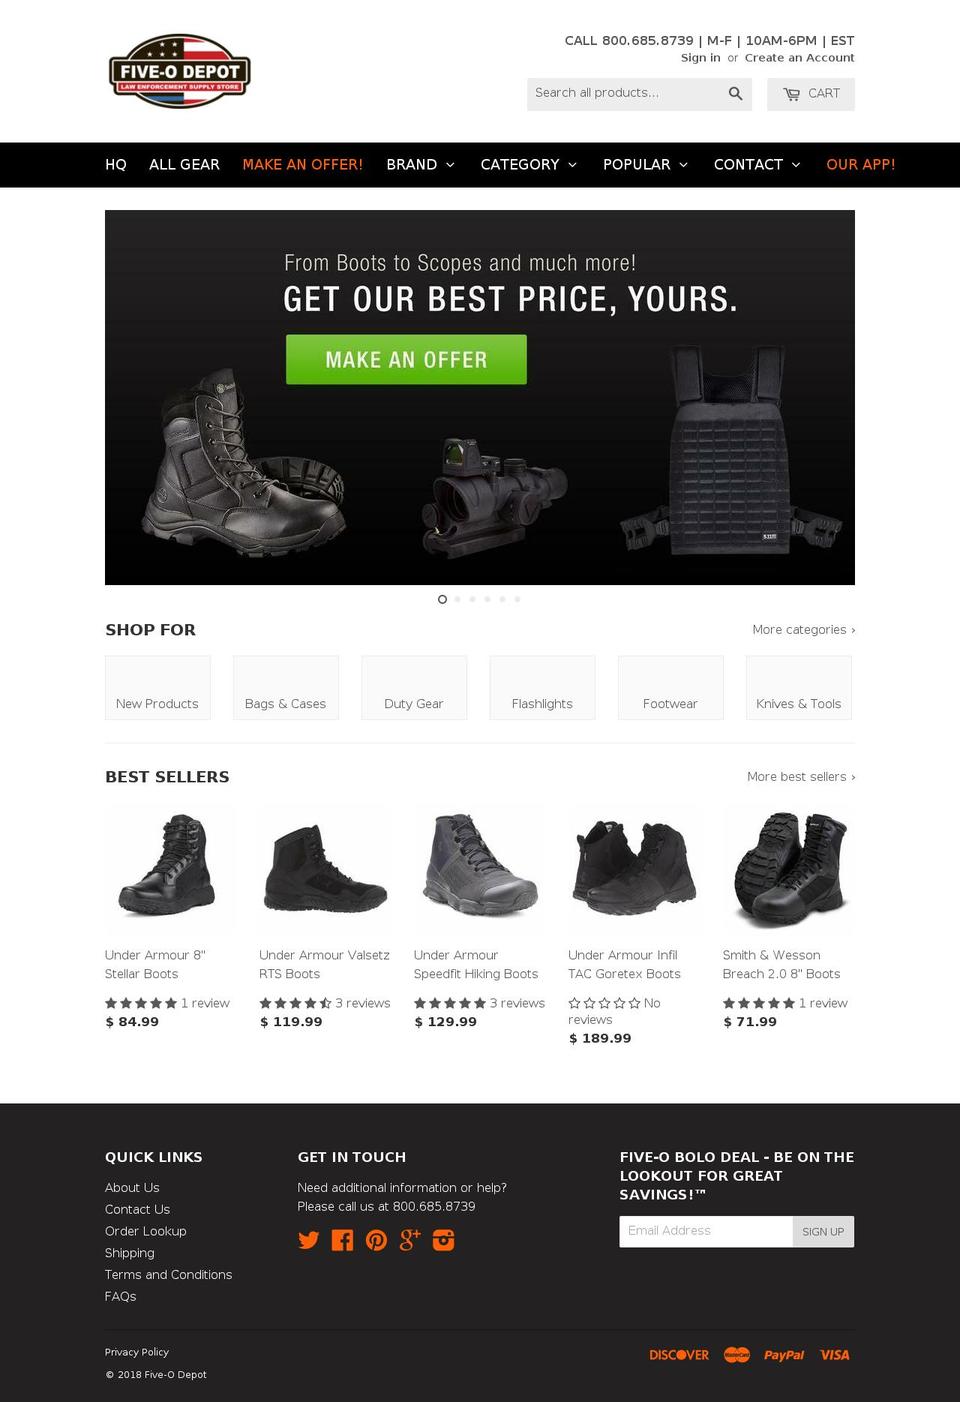 [DEV-AN]Five-O MAIN Theme - July 5 2018 Shopify theme site example jacksonvillepolicesupply.com